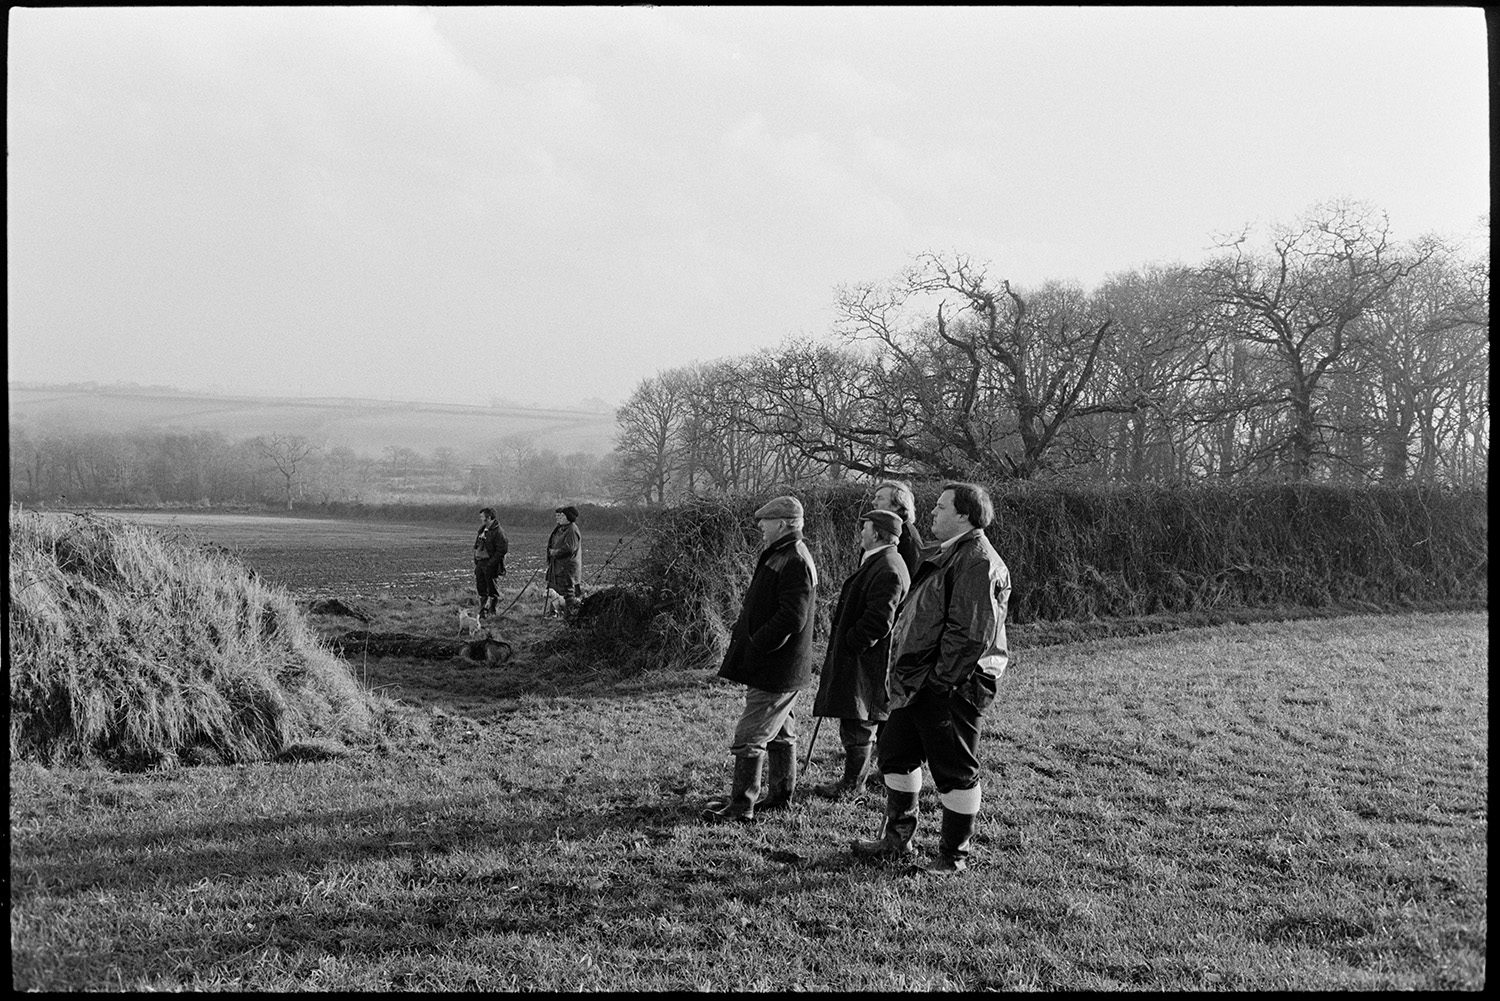 Hunt followers watching hounds in wood.
[People with dogs and sticks standing in a field looking over a hedge near Riddlecombe, watching a hunt. Trees can be seen in the background.]